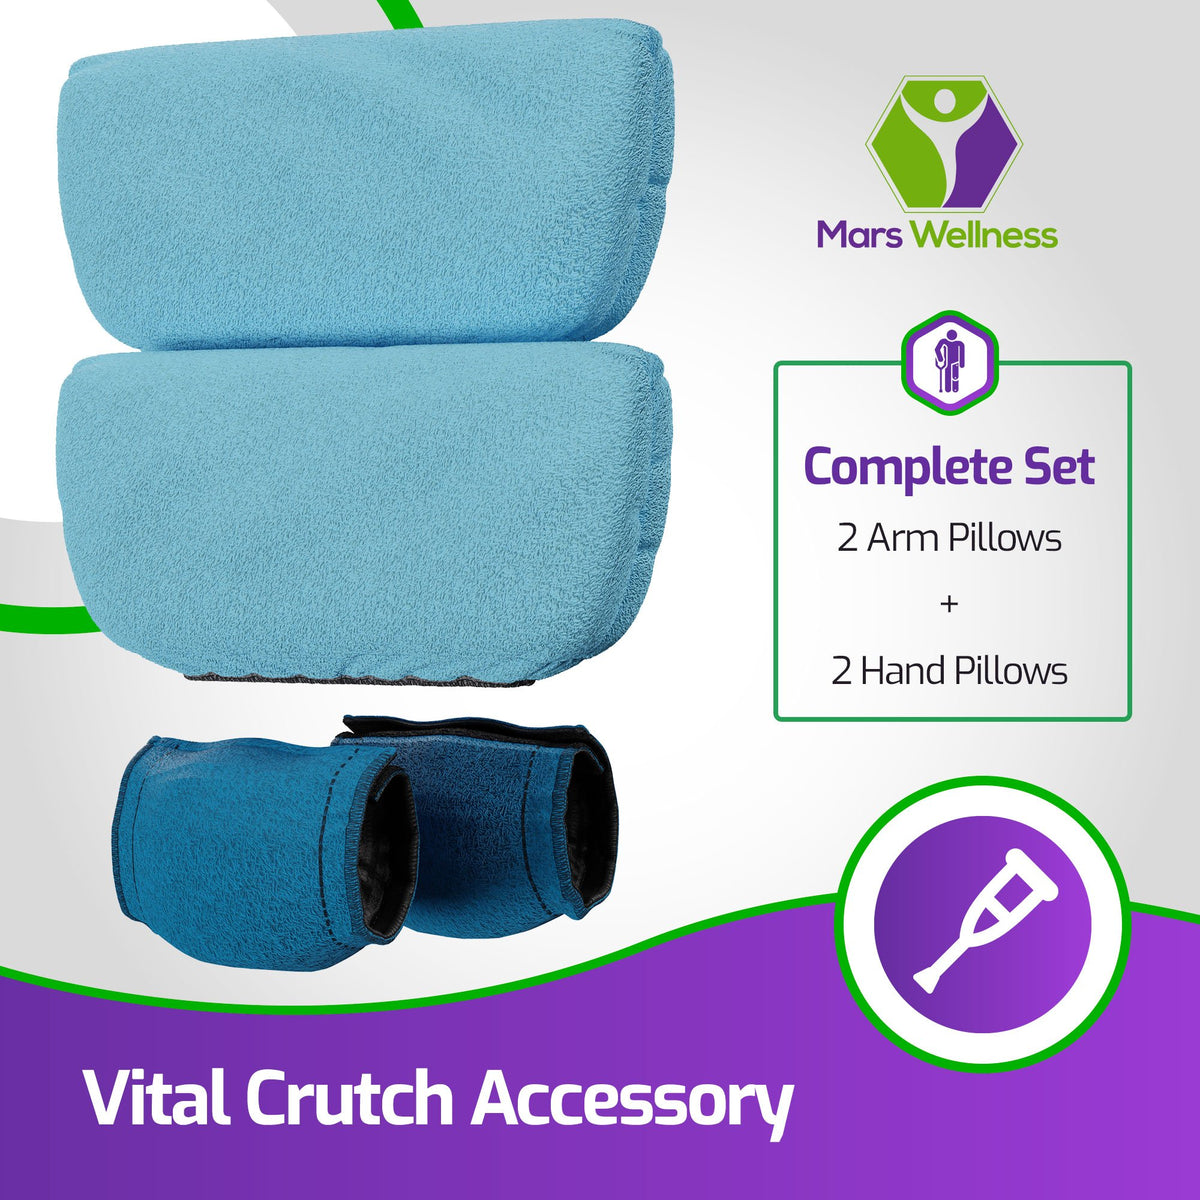 Crutch Pillows Set - Moisture Wicking Under Arm Crutches - Blue - Handle Pillow Covers for Hand Grips - Crutch Pads Fits Standard Crutches - Machine Washable & Latex Free Crutches for Adults, Youth